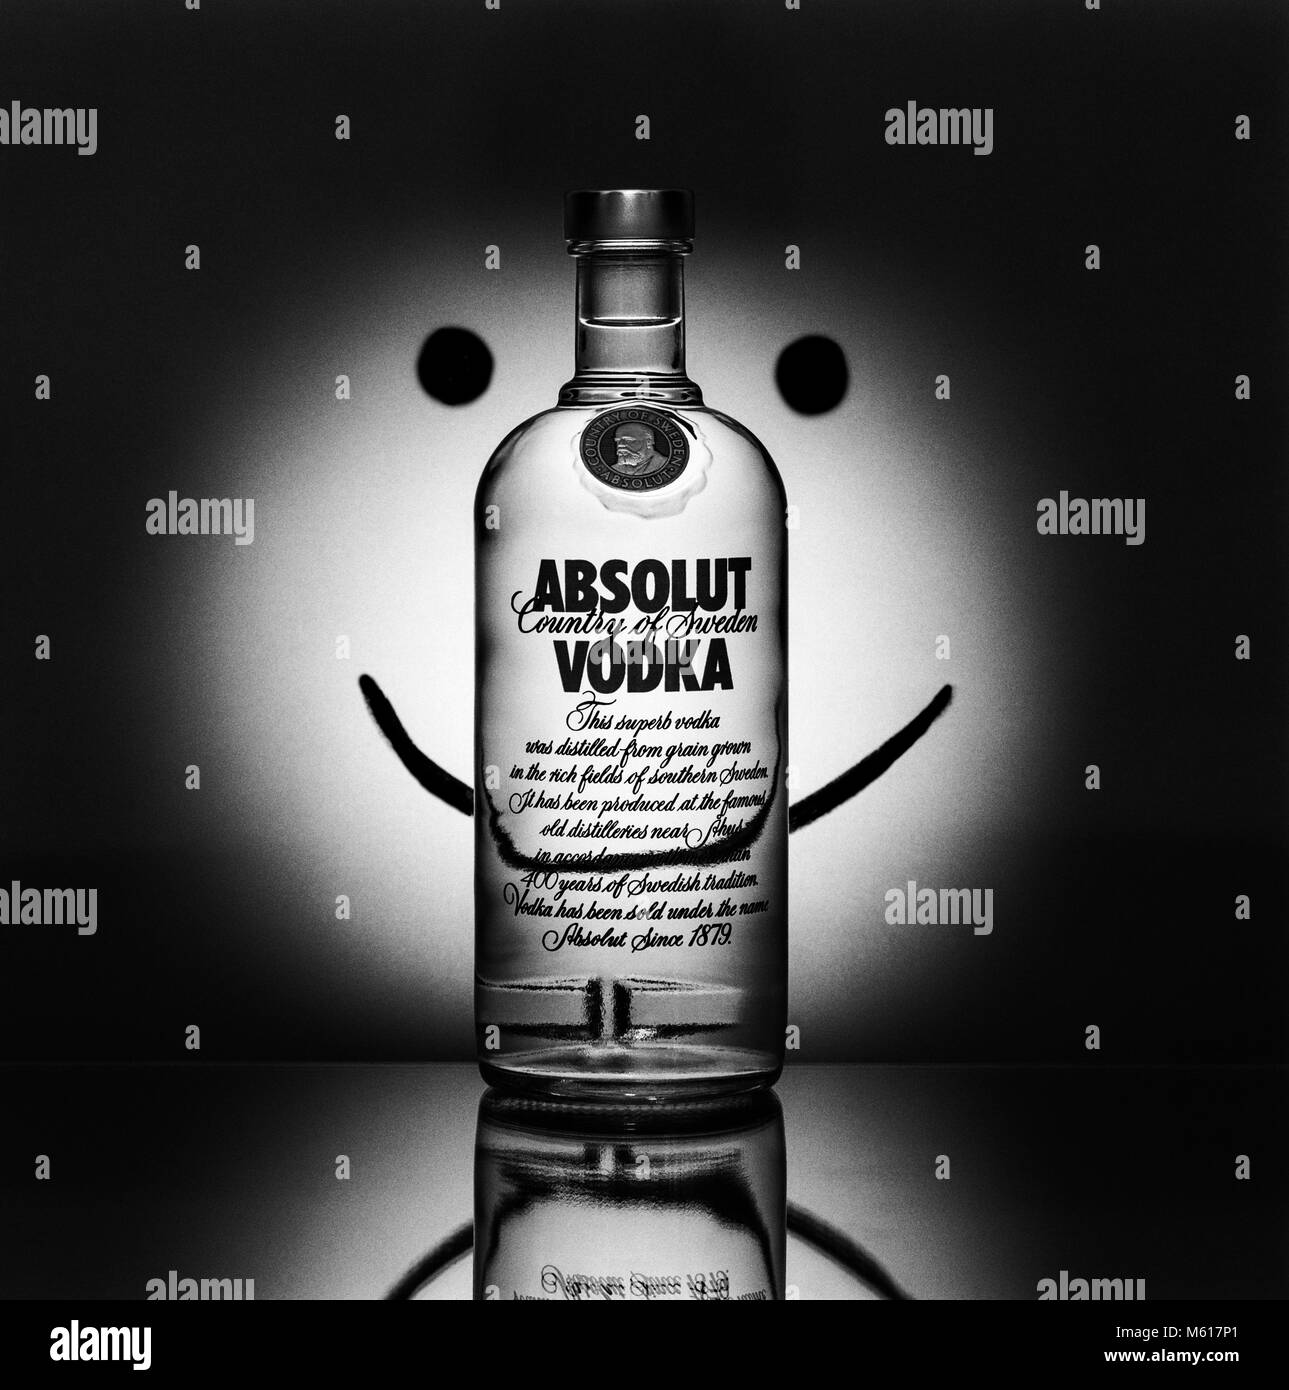 Absolut vodka bottle photographed in the style of the Absolut ads, Absolut smiley, 22 May 1992 Stock Photo